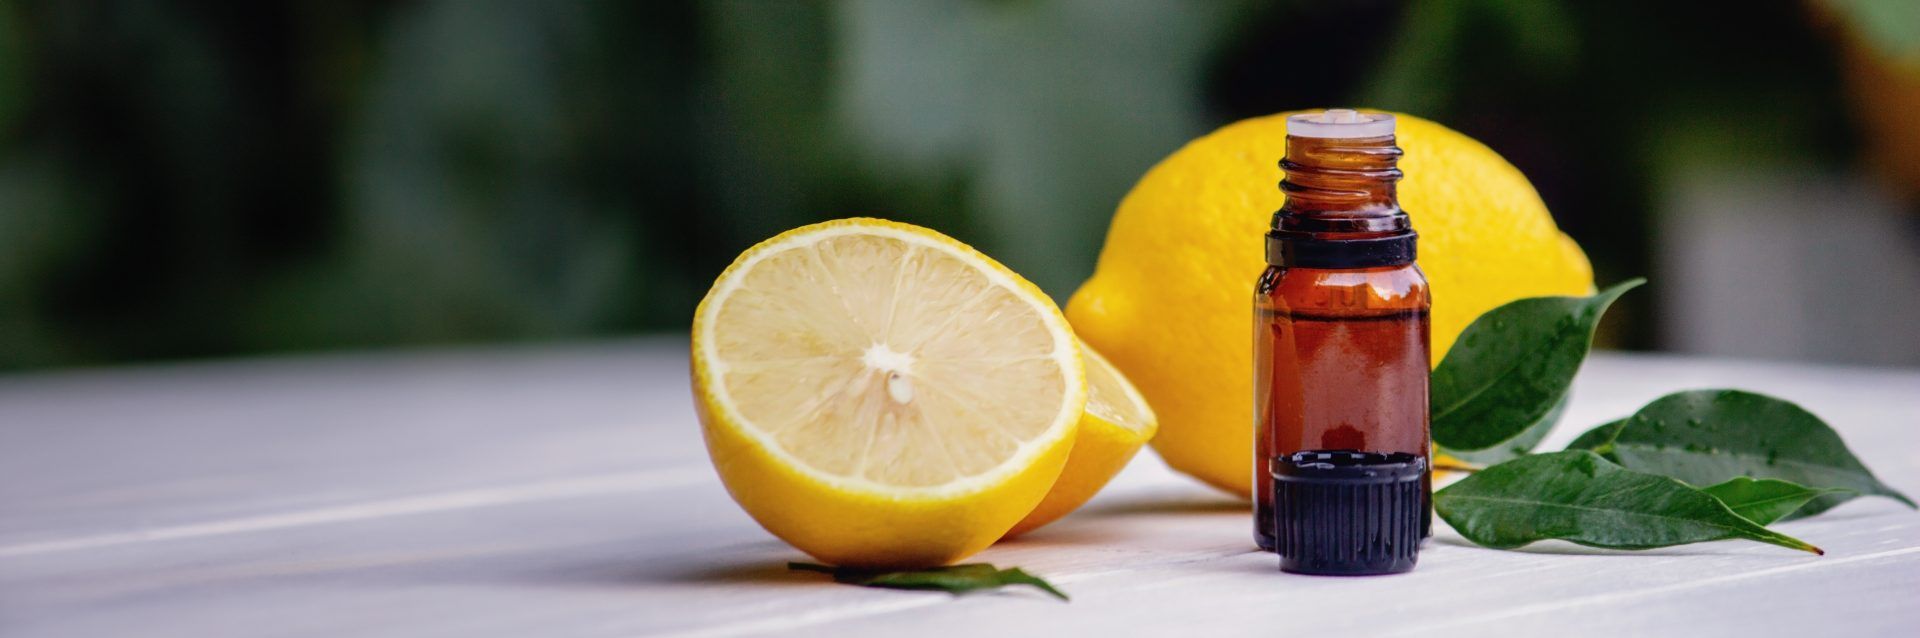 Lemons, one cut and one uncut, sit next to an open bottle of oil and a sprig of thyme